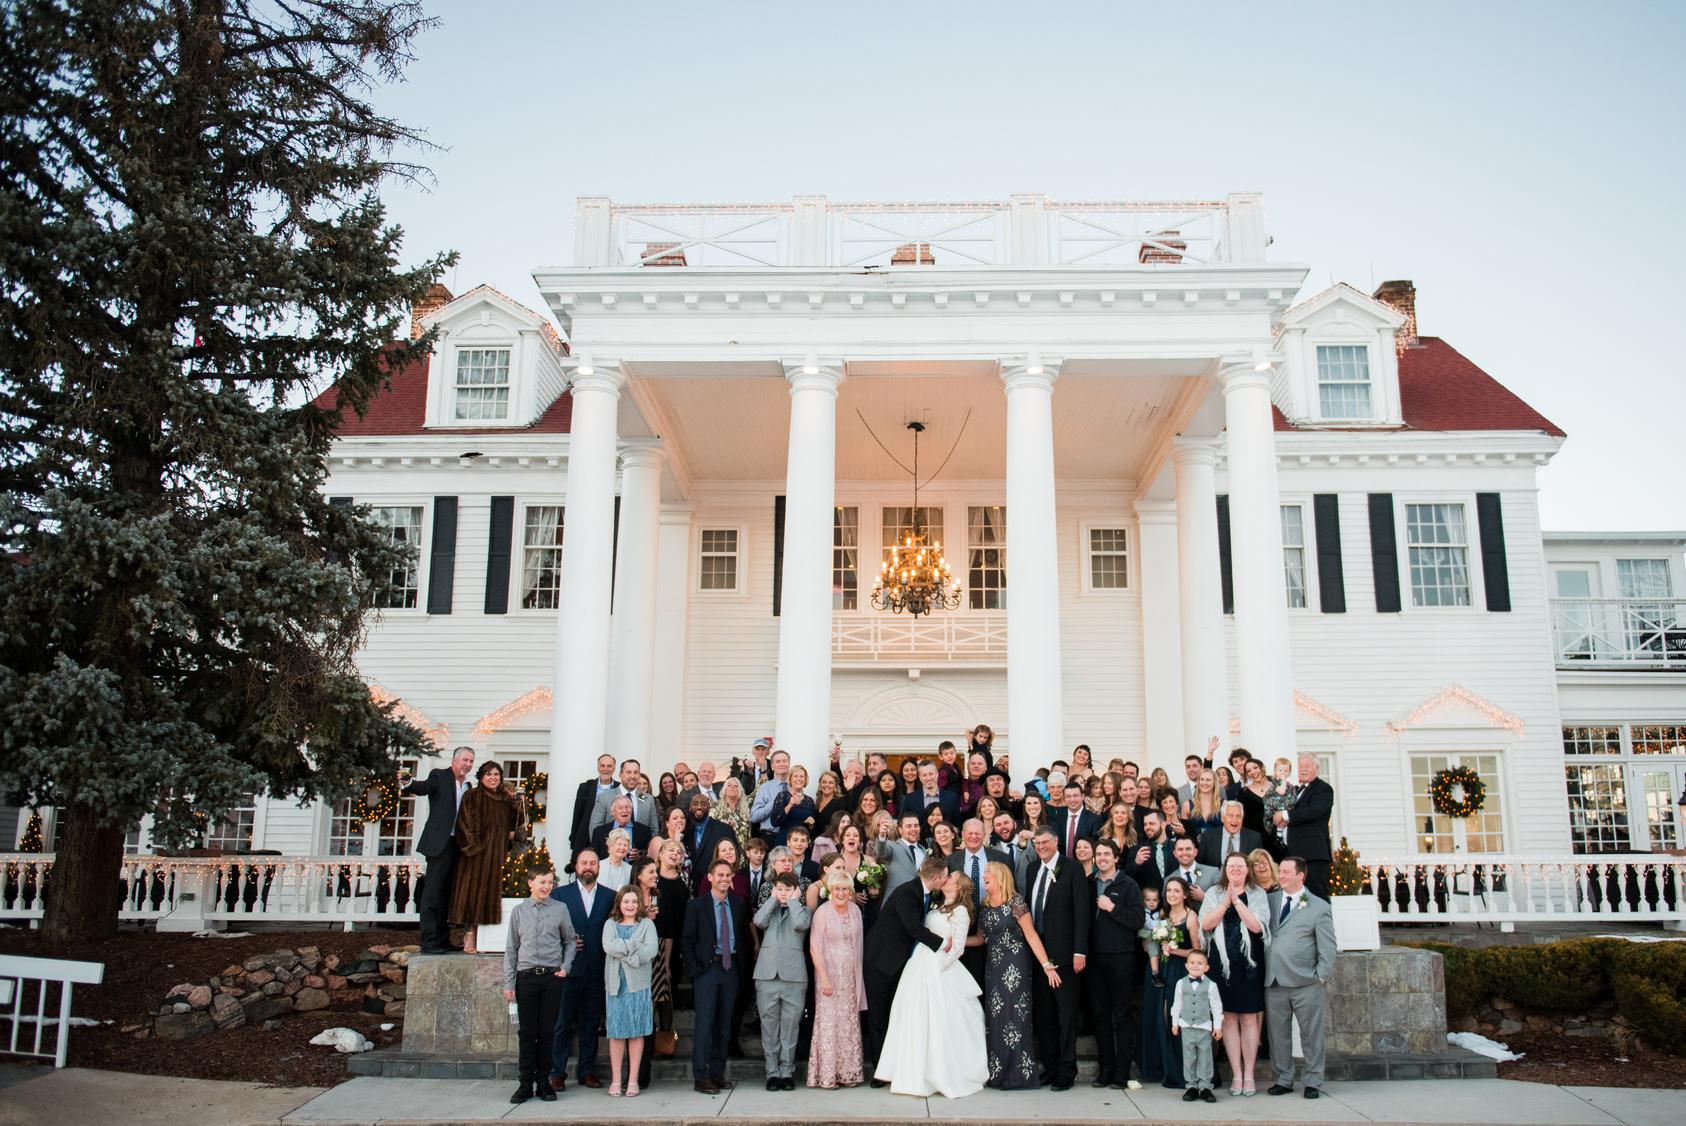 Wedding guests pose for a photo in front of the mansion at The Manor House, captured by Denver, Colorado wedding photographer Two One Photography.